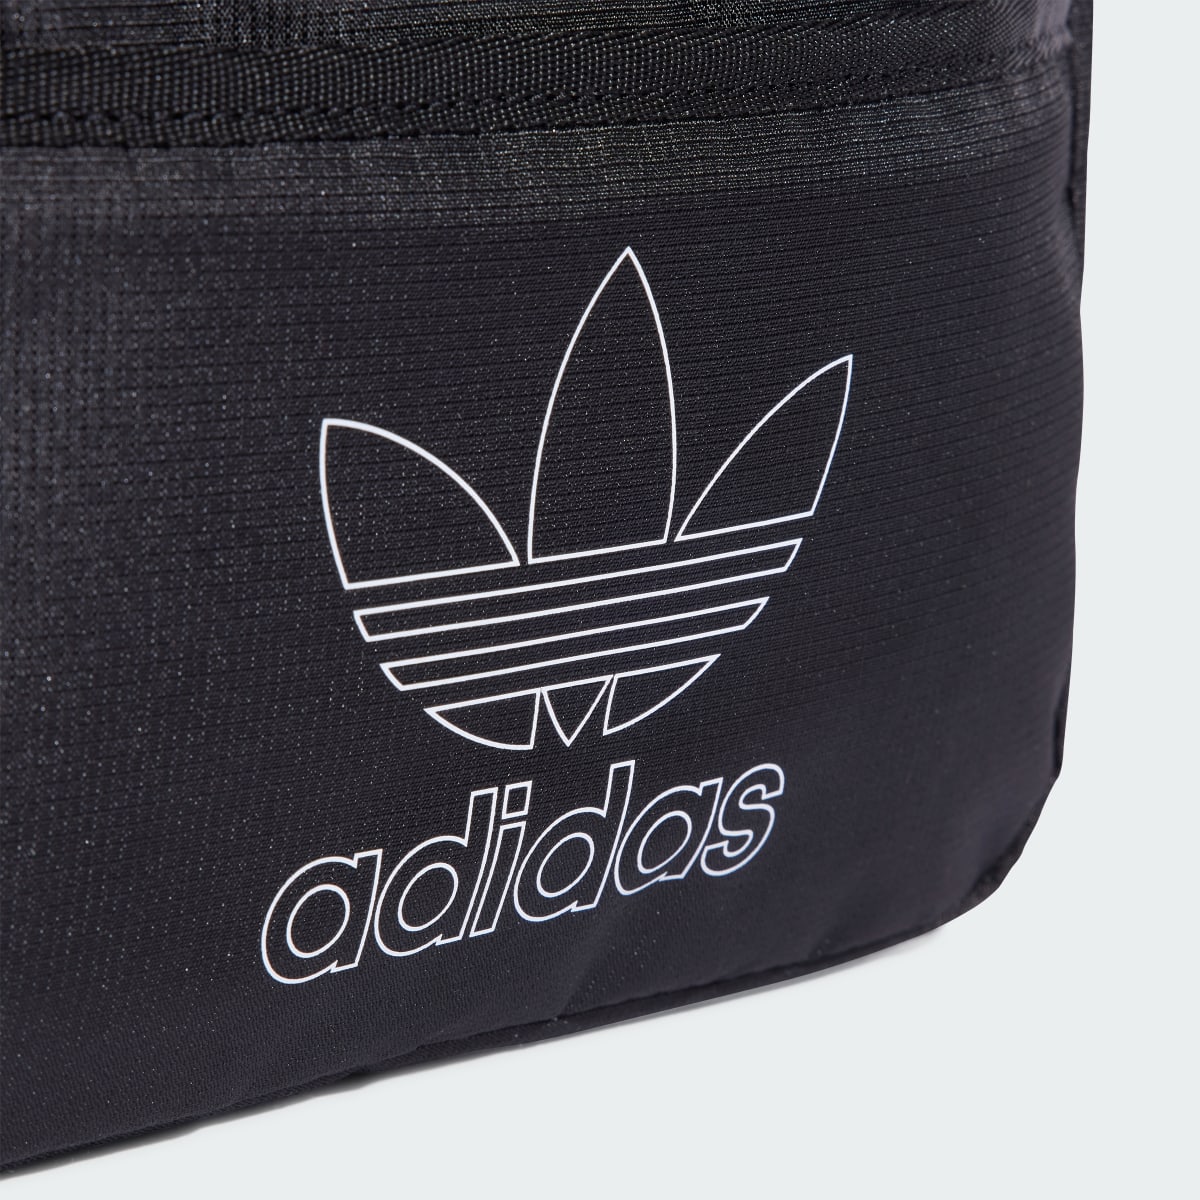 Adidas Bolso Small Airliner. 6